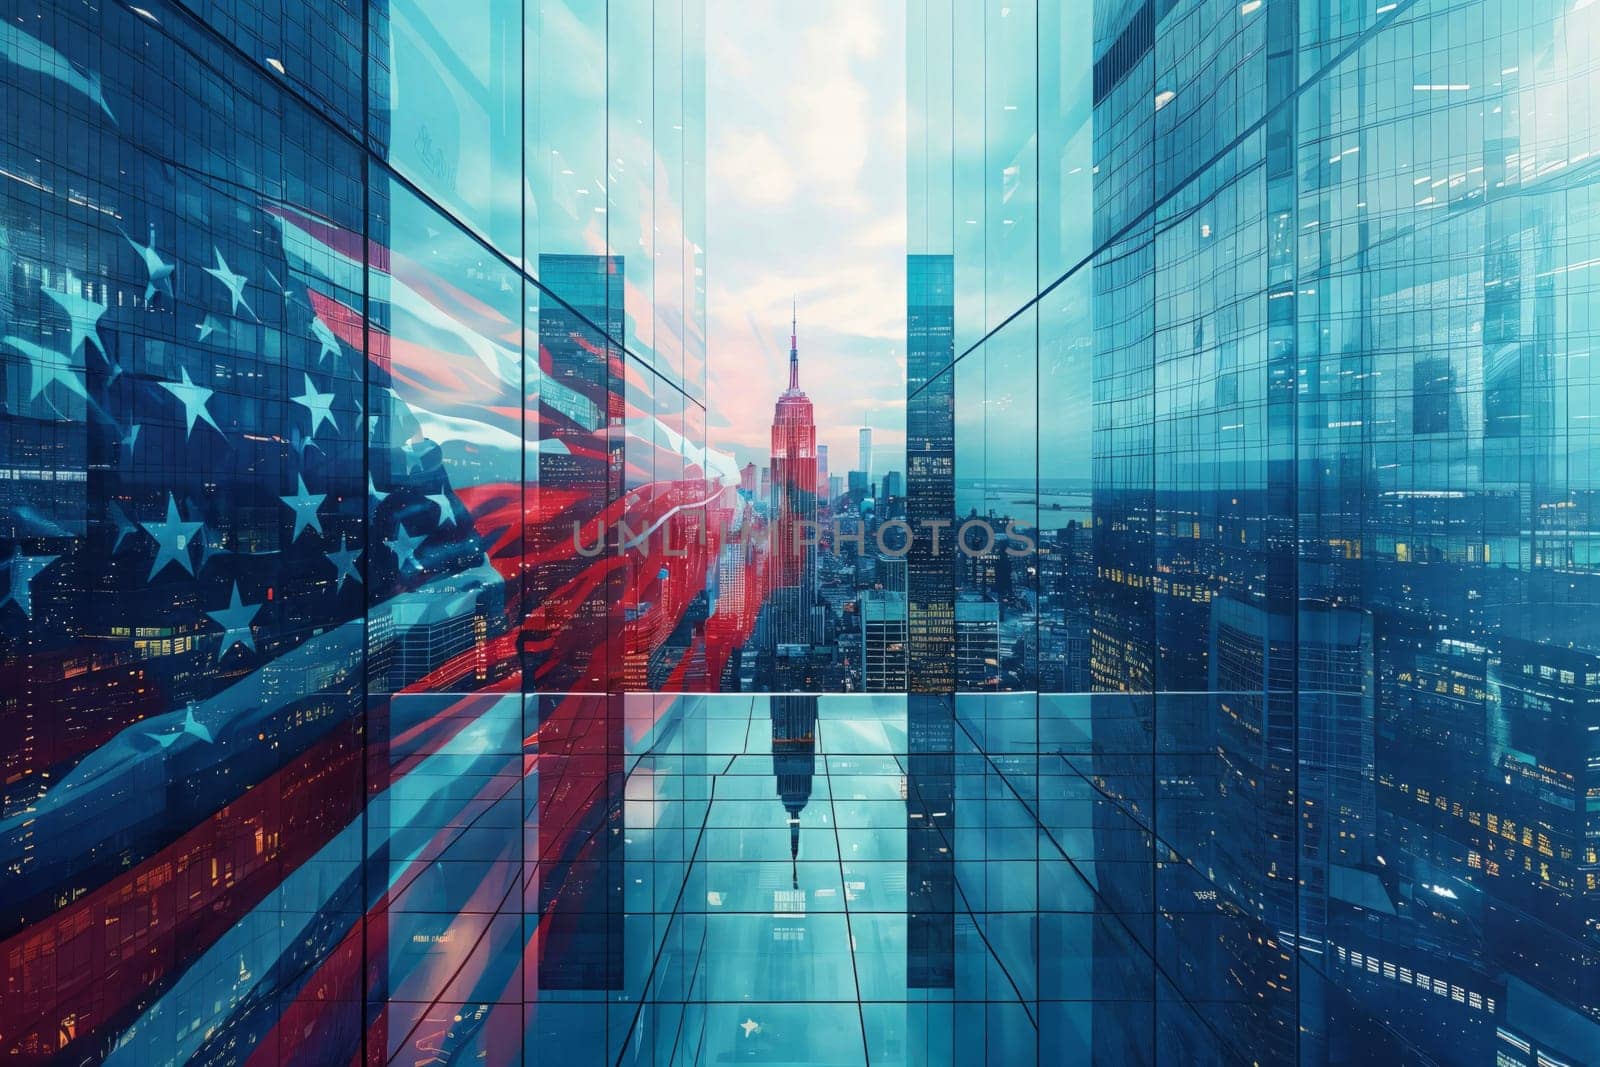 The U.S. flag is reflected on glass and metal surfaces of a modern cityscape, viewed from above at dusk.